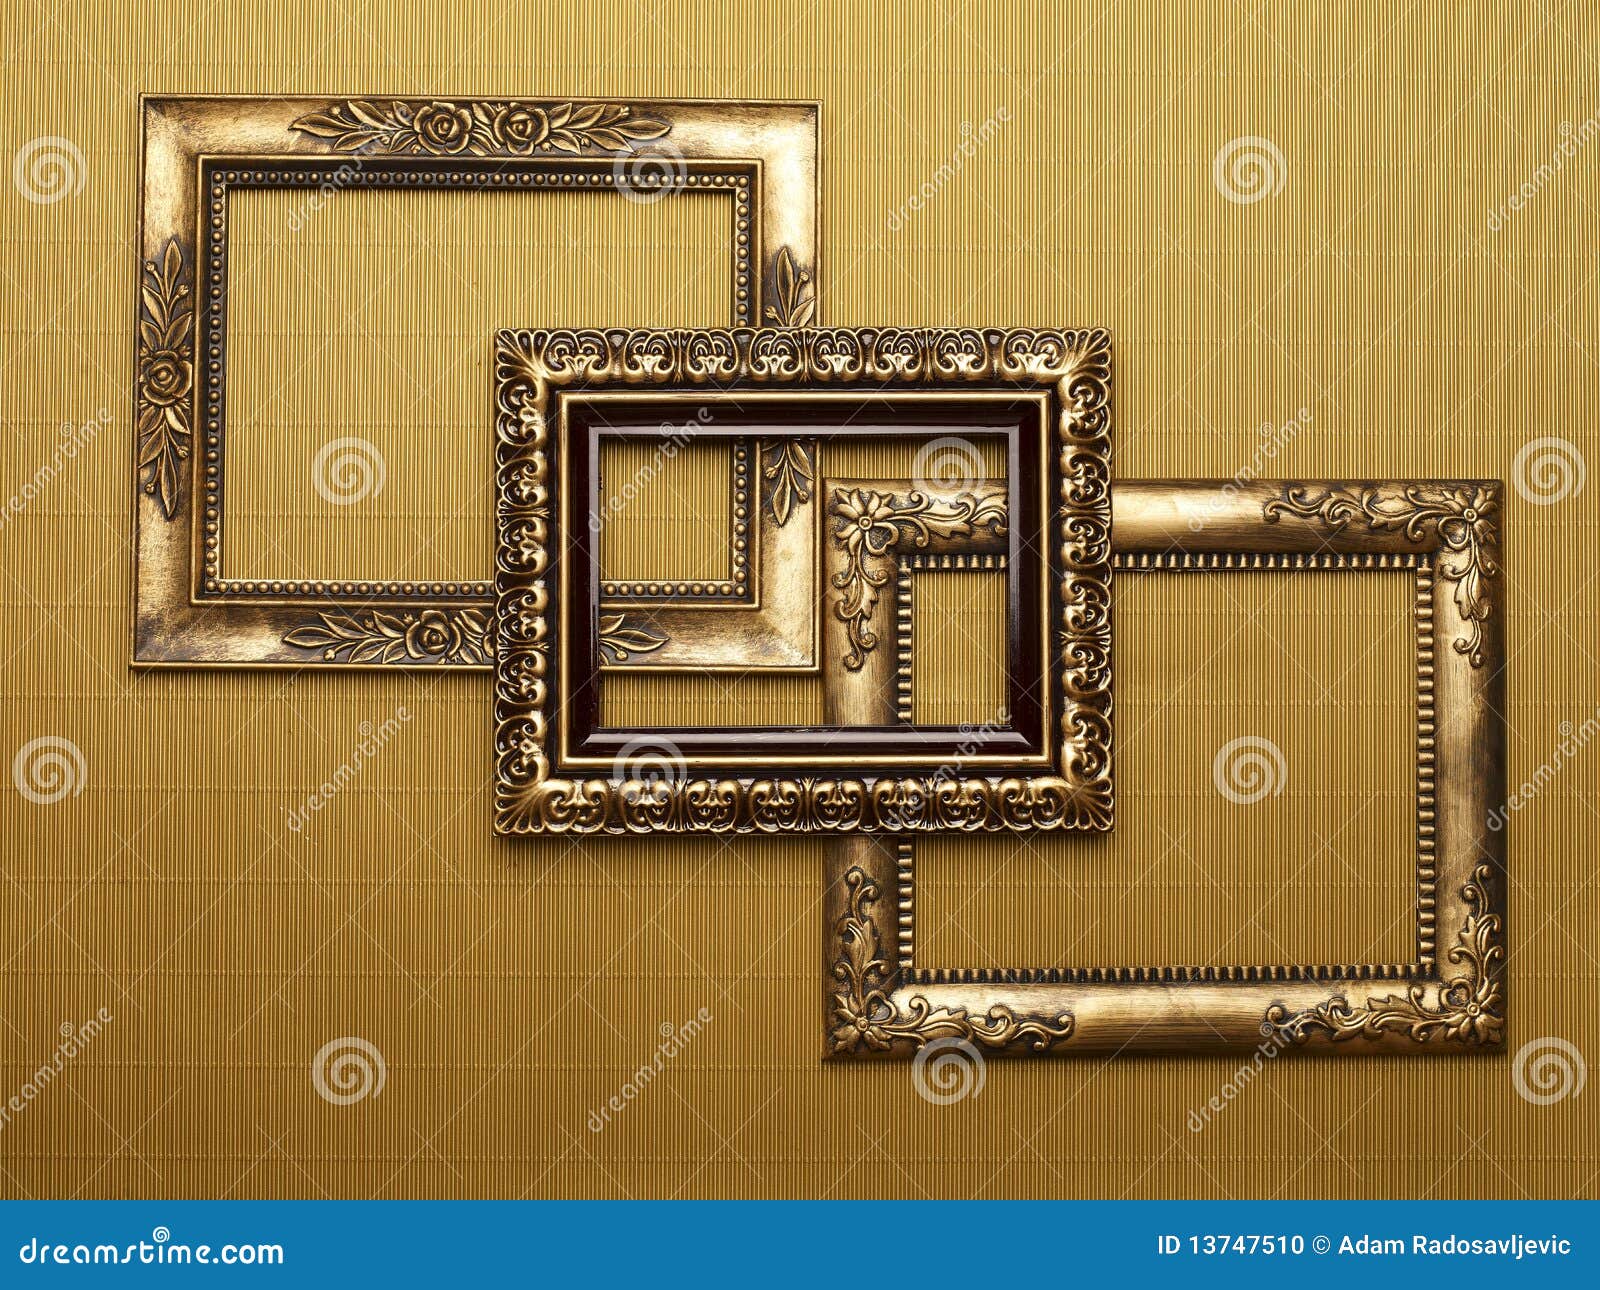 overlapping frames on gold